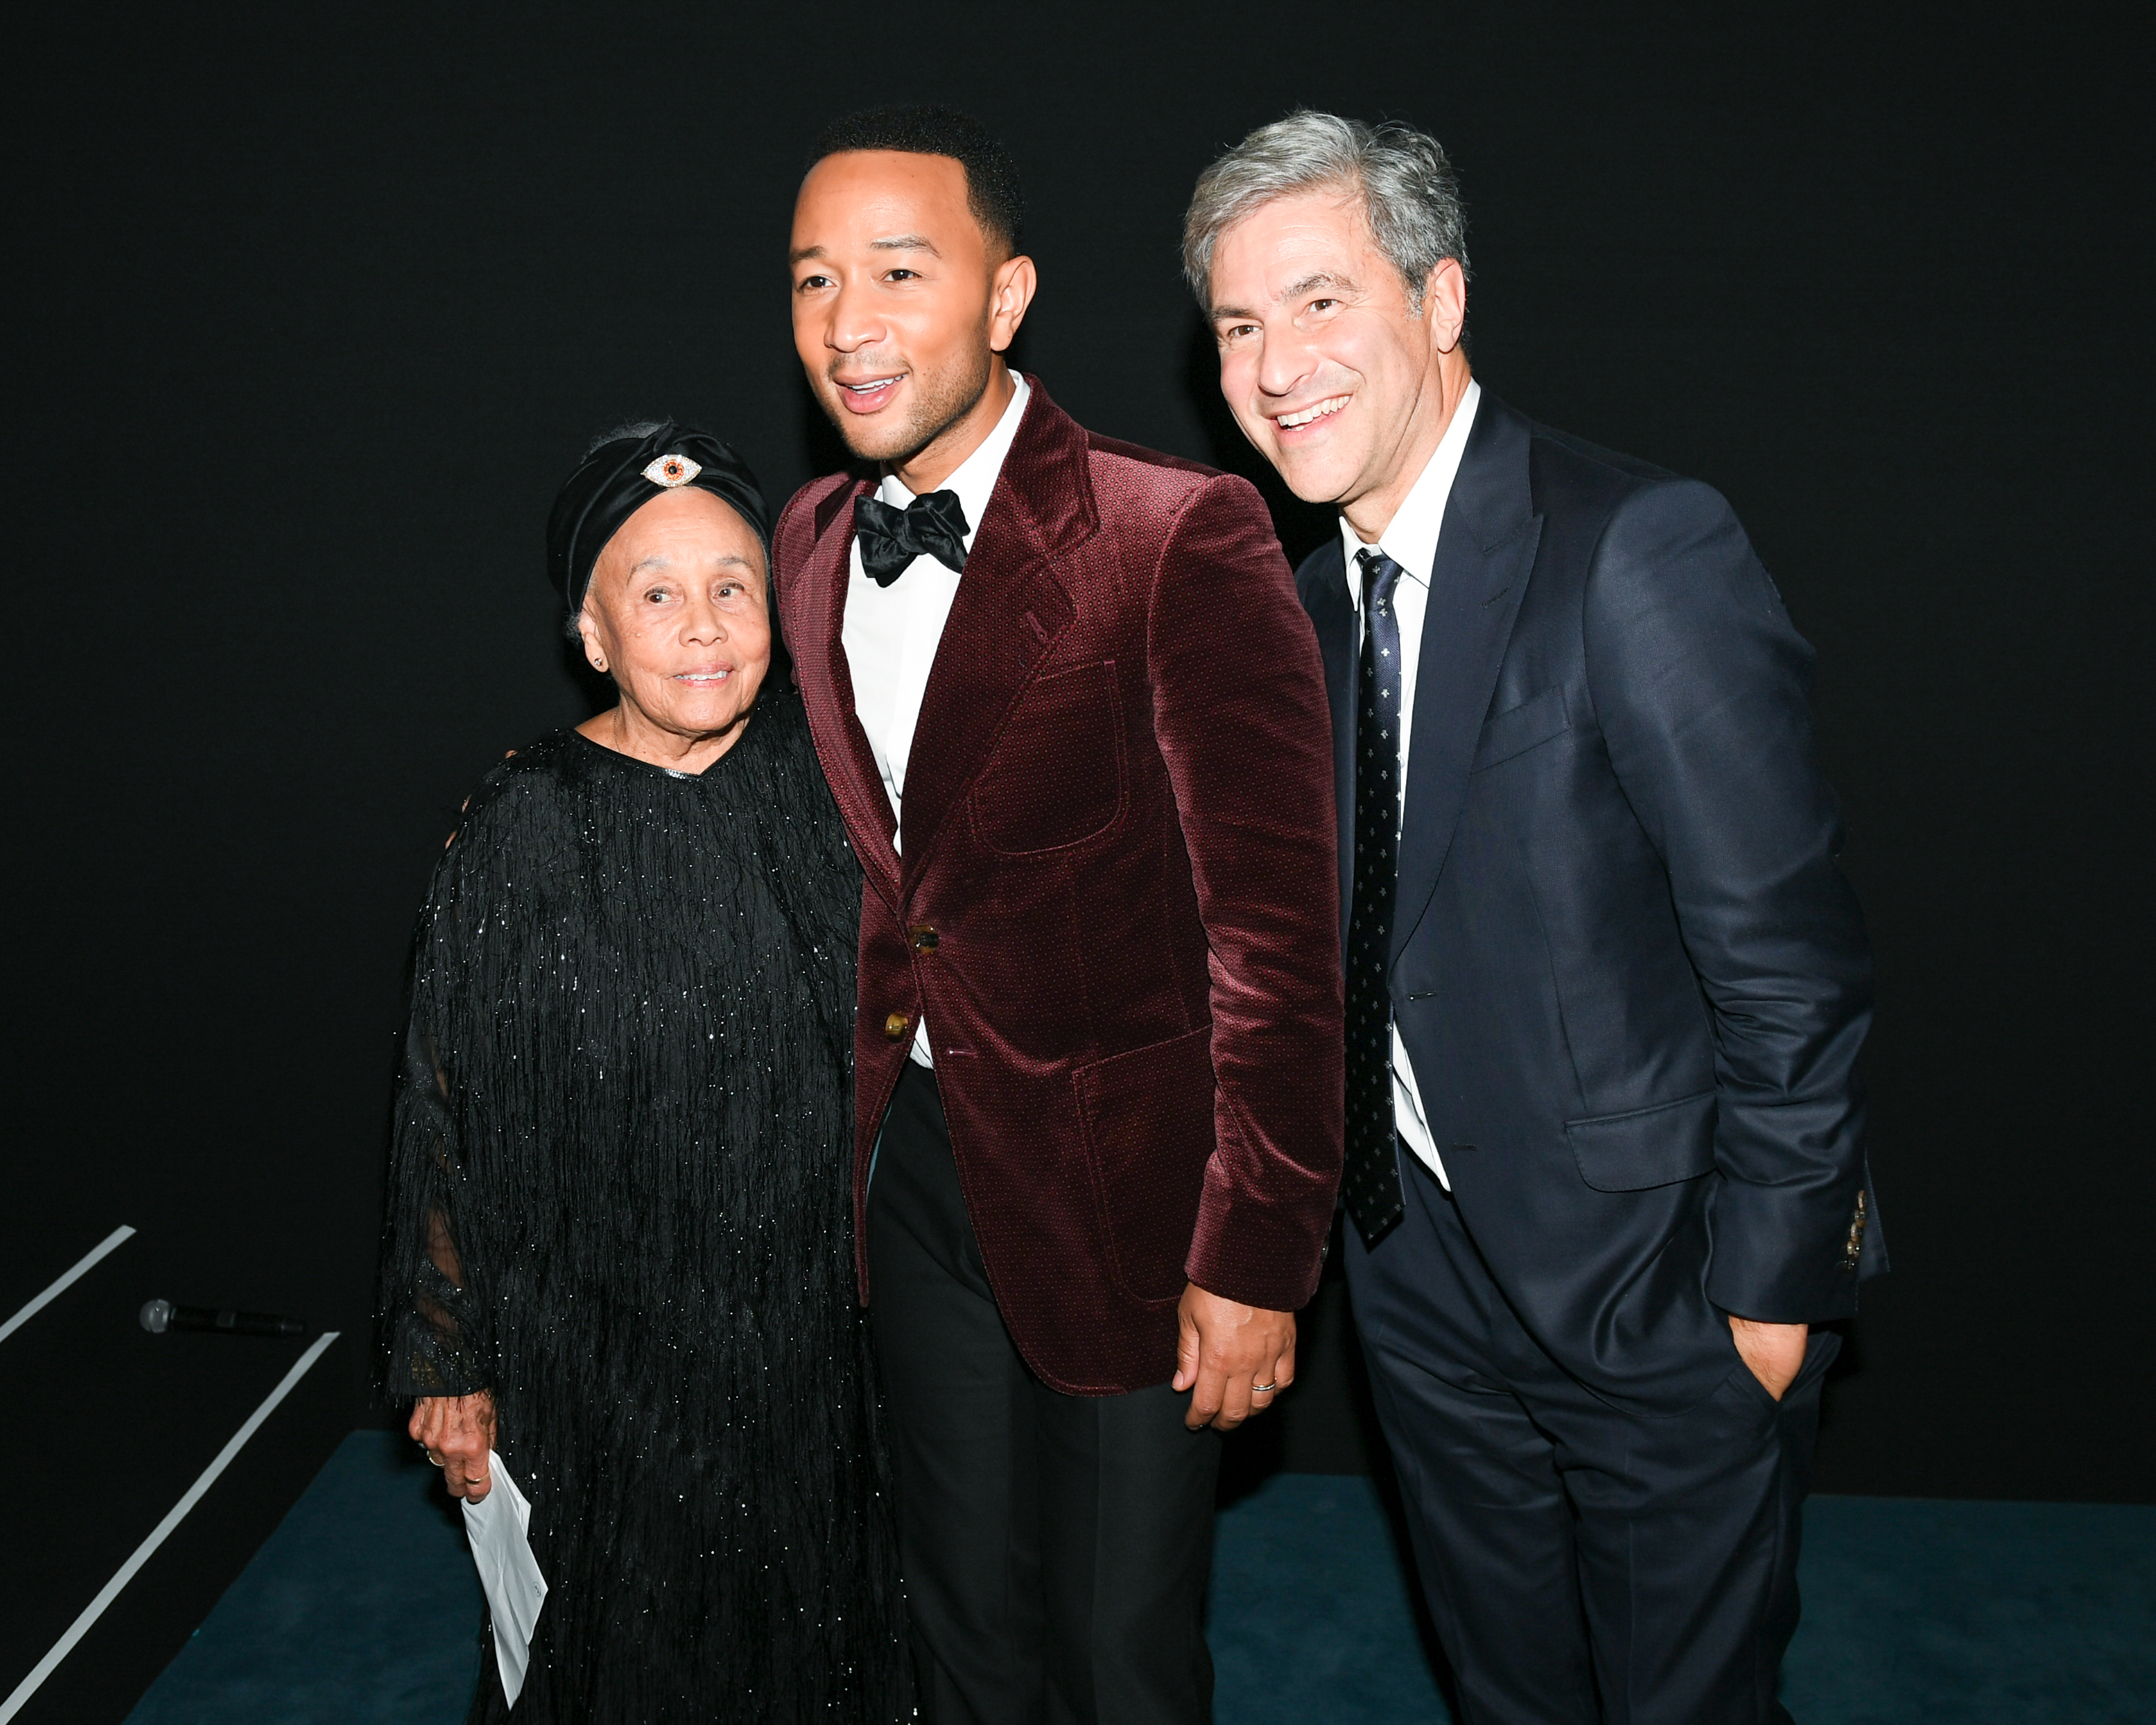 Honoree Betye Saar, John Legend, and LACMA CEO and Director Michael Govan, photo by Billy Farrell/BFA.com